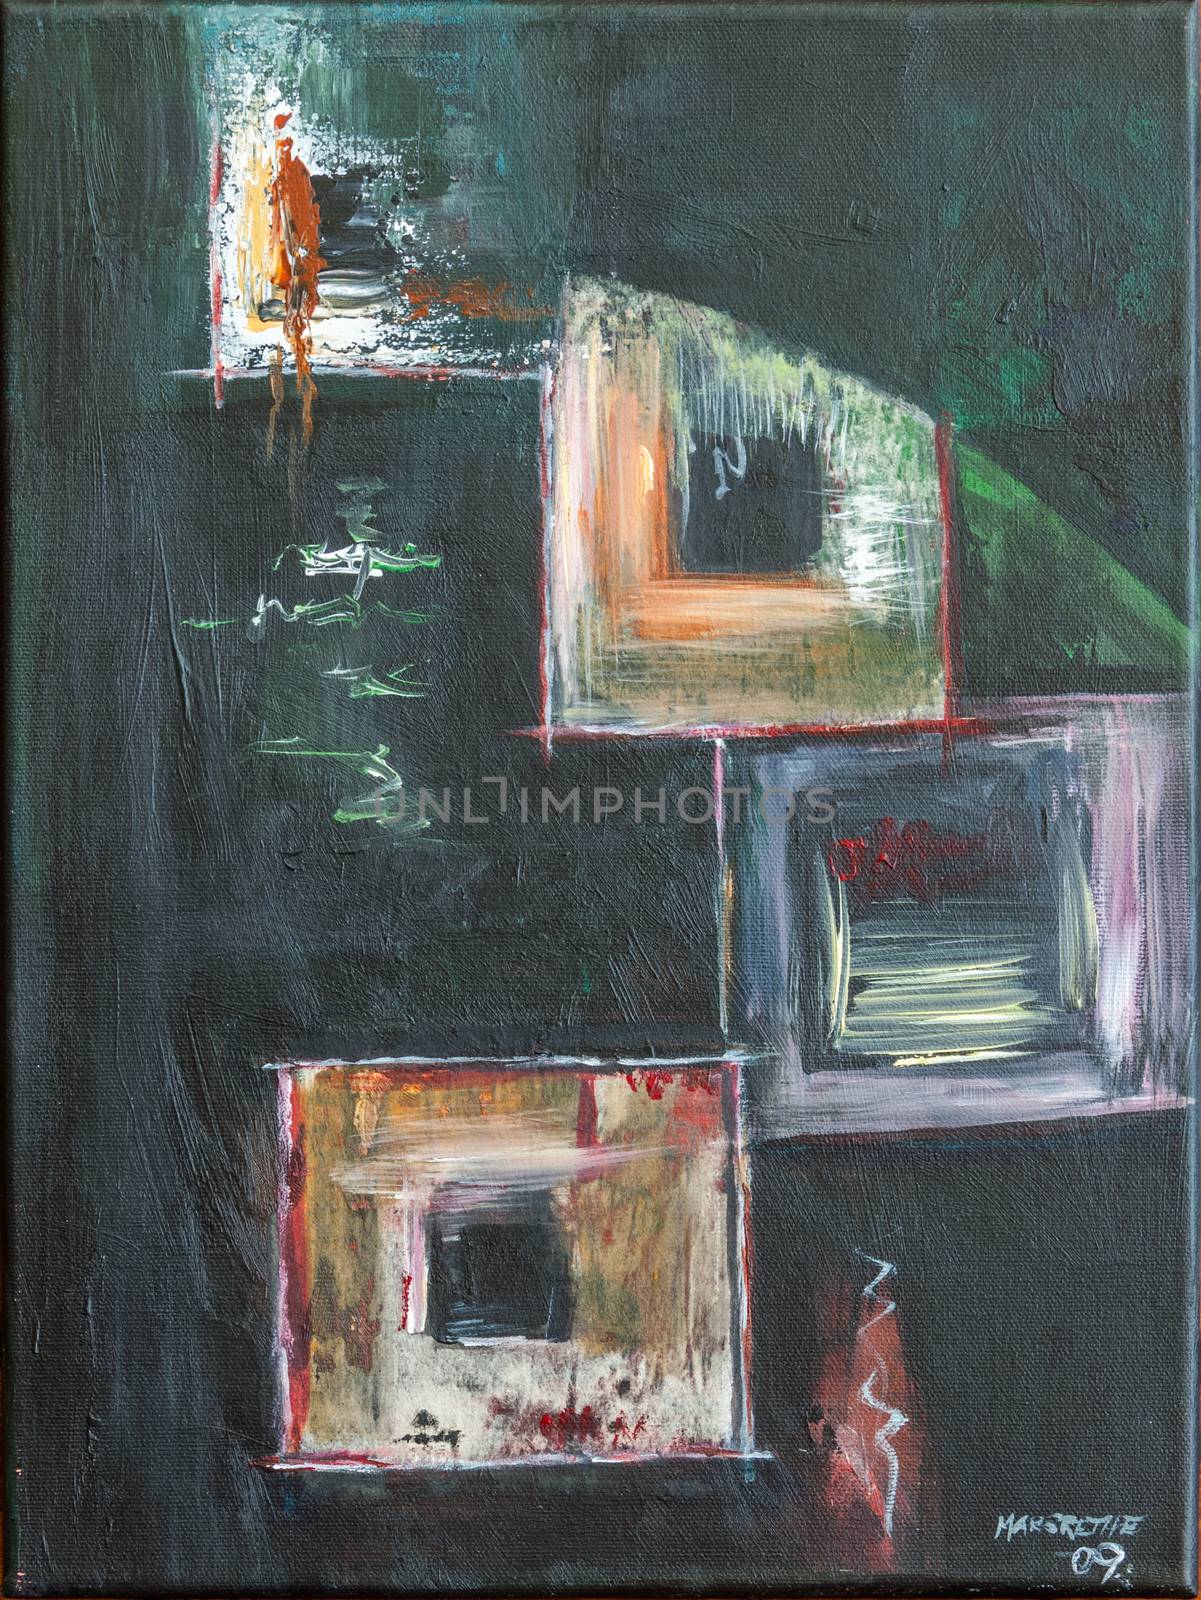 Nonfigurative oil art painting on canvas. Painting inspired by windows in different sizes, forms, and colors.